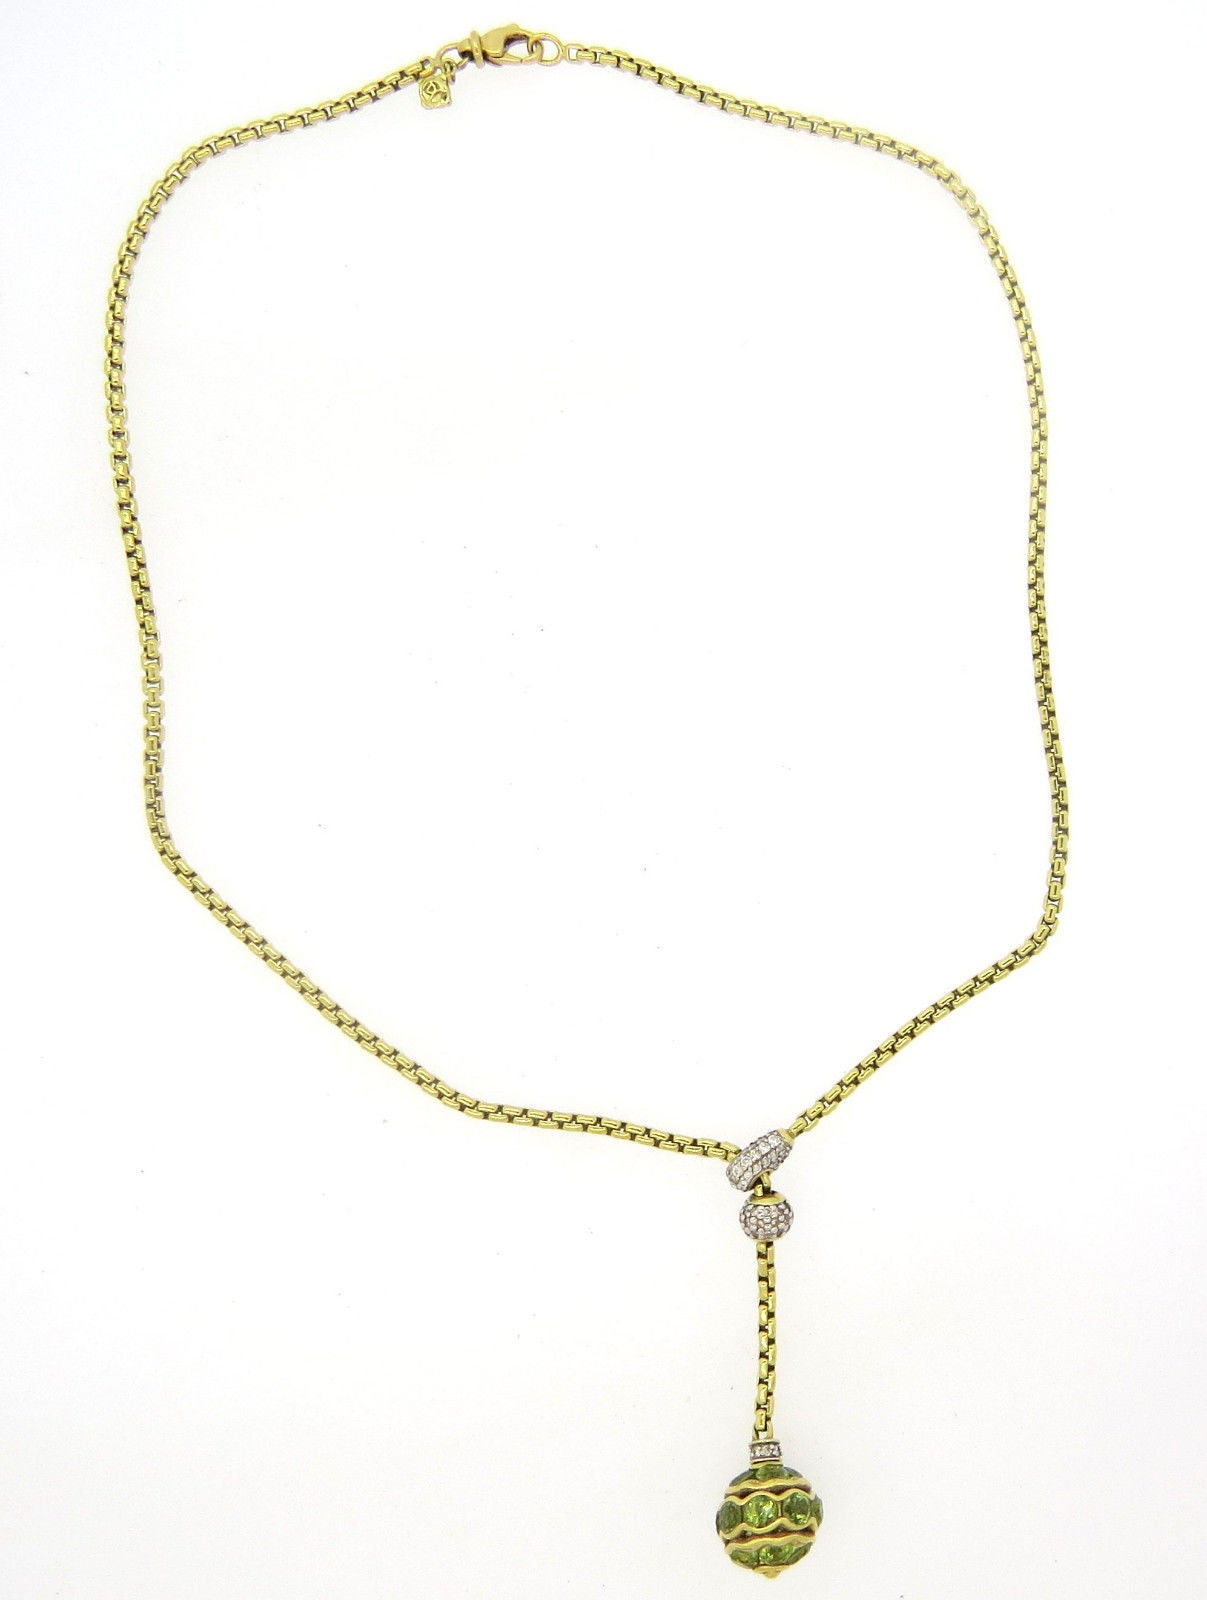 18k gold lariat necklace with ball pendant, crafted by David Yurman, featuring peridots and diamonds. Necklace is 17